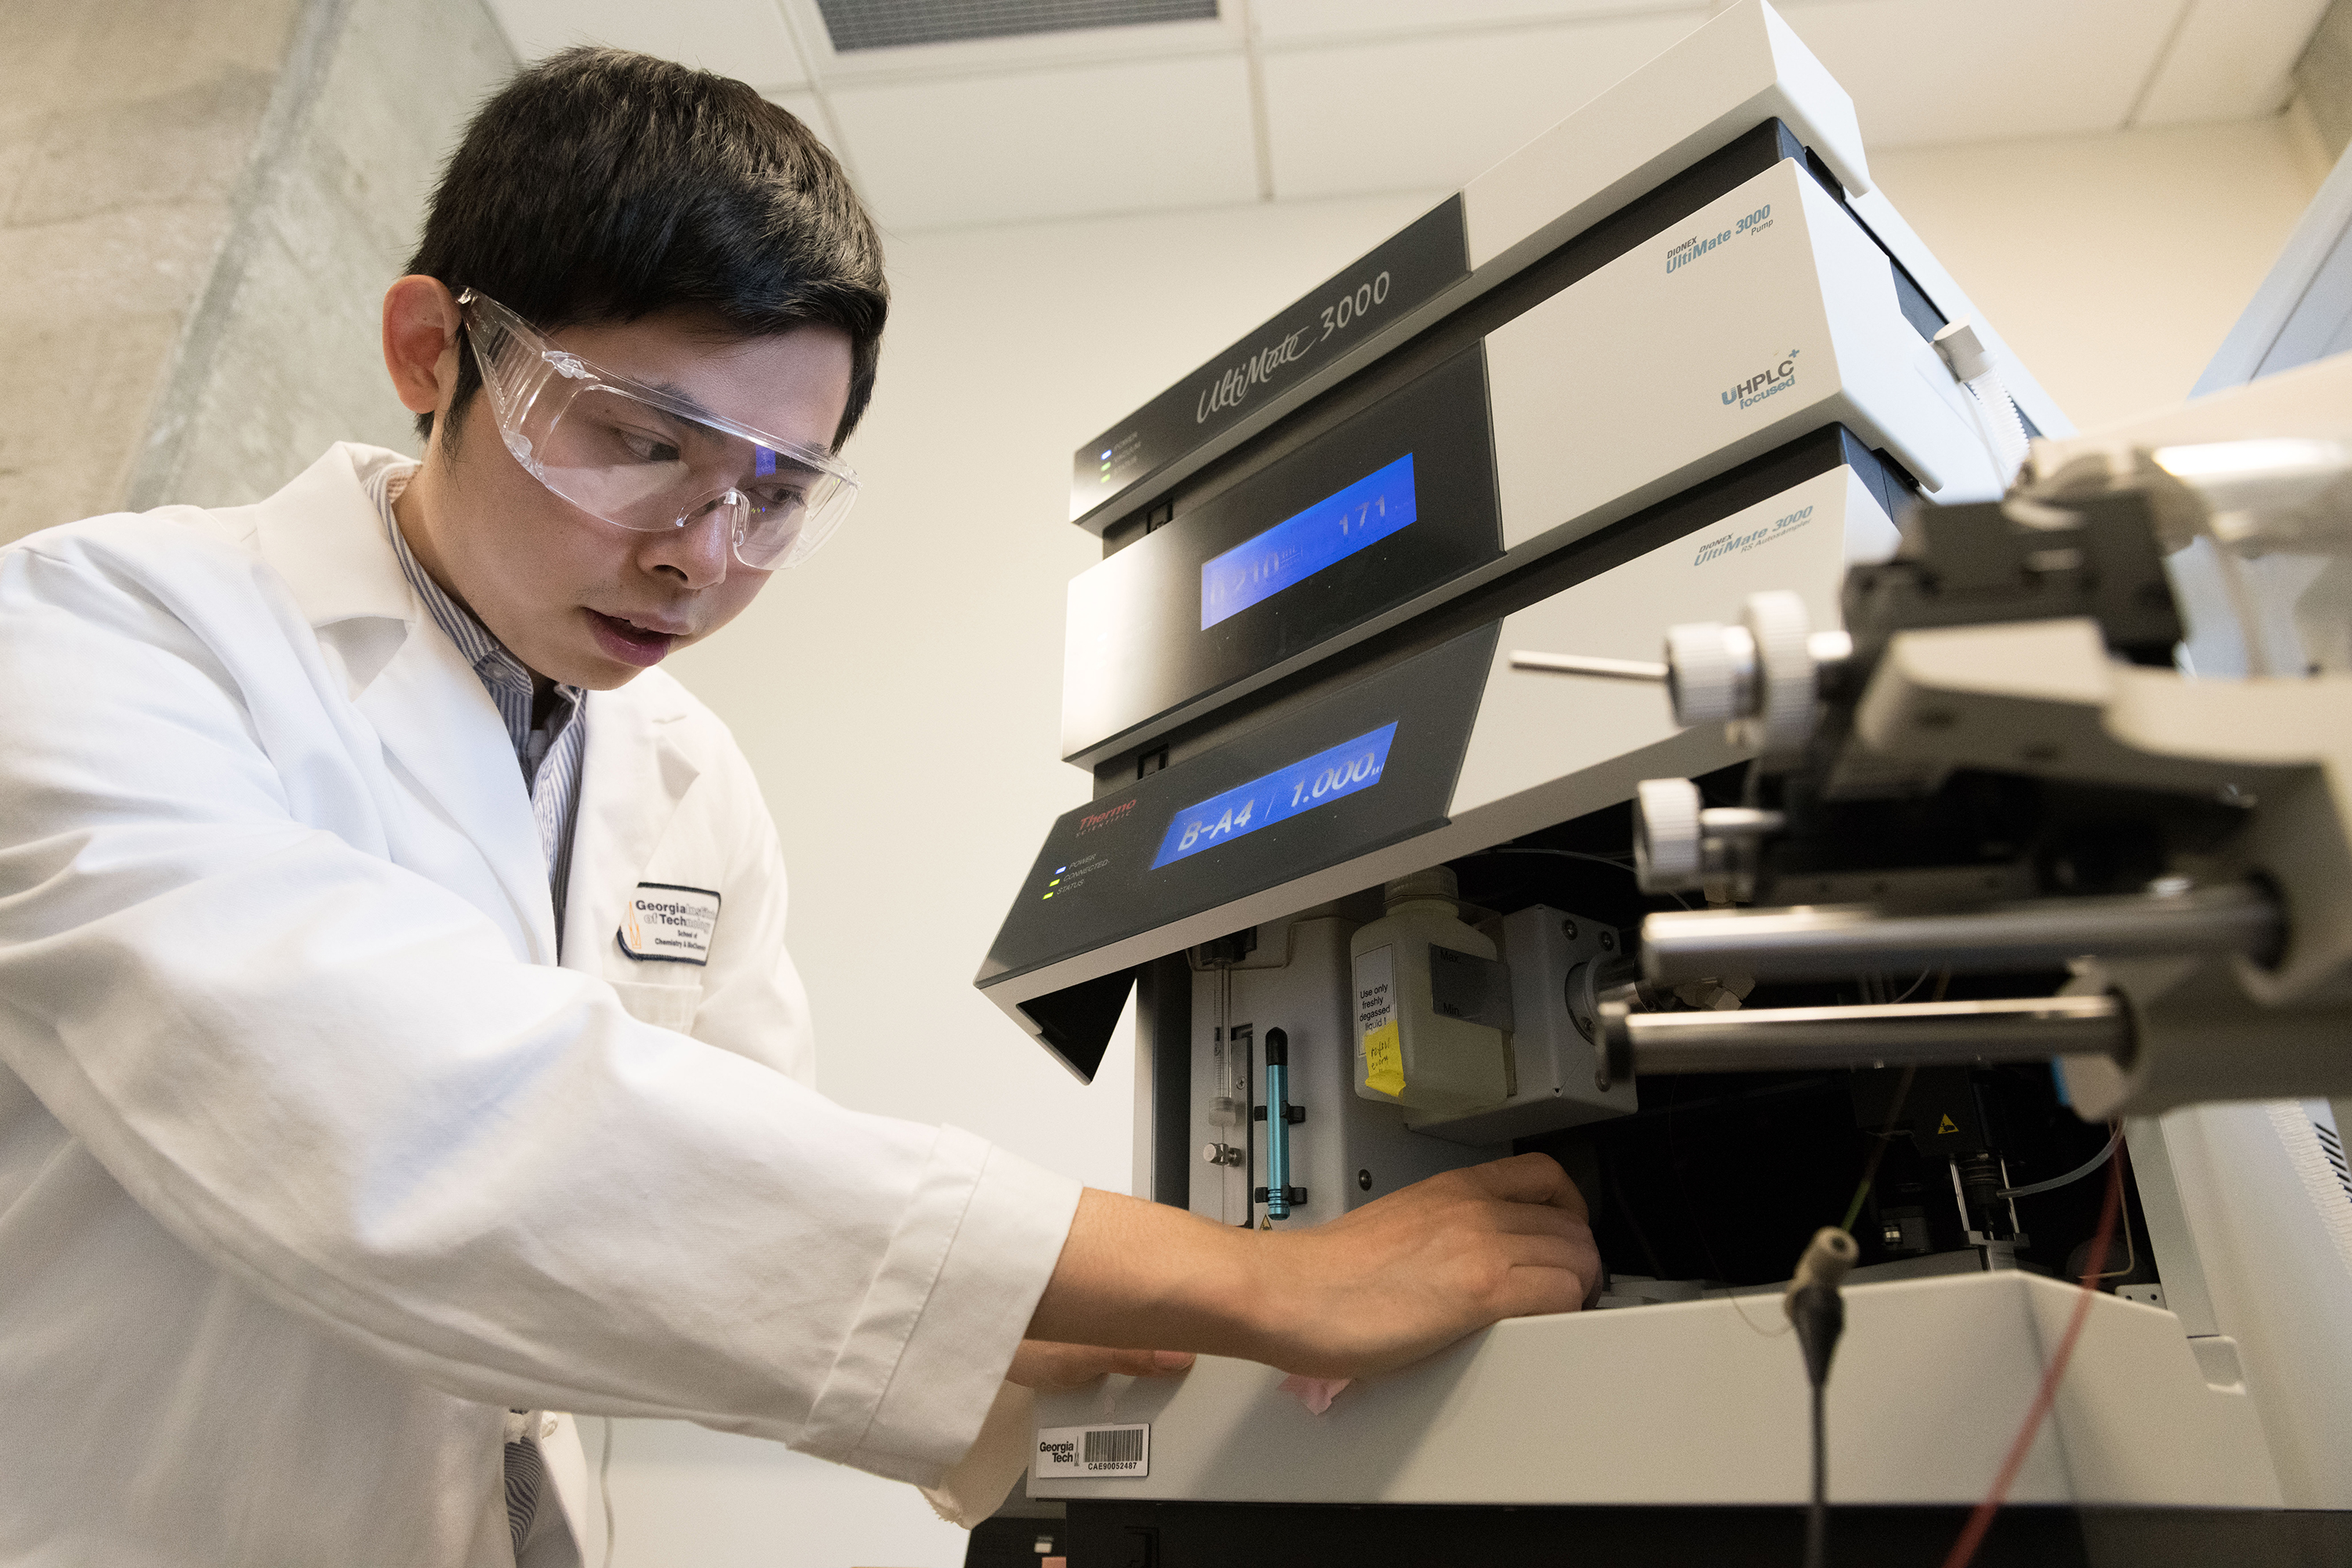 Graduate research assistant Haopeng Xiao loads a glycoprotein sample, which was culled with the "chemical octopus" co-developed in Ronghu Wu's lab at Georgia Tech, into a mass spectrometer. The broad array of captured glycoproteins produce identifiable signals, including those from trace glycoprotein species that previously could not be so comprehensively collected and are vital to early cancer detection. Credit: Georgia Tech / Allison Carter